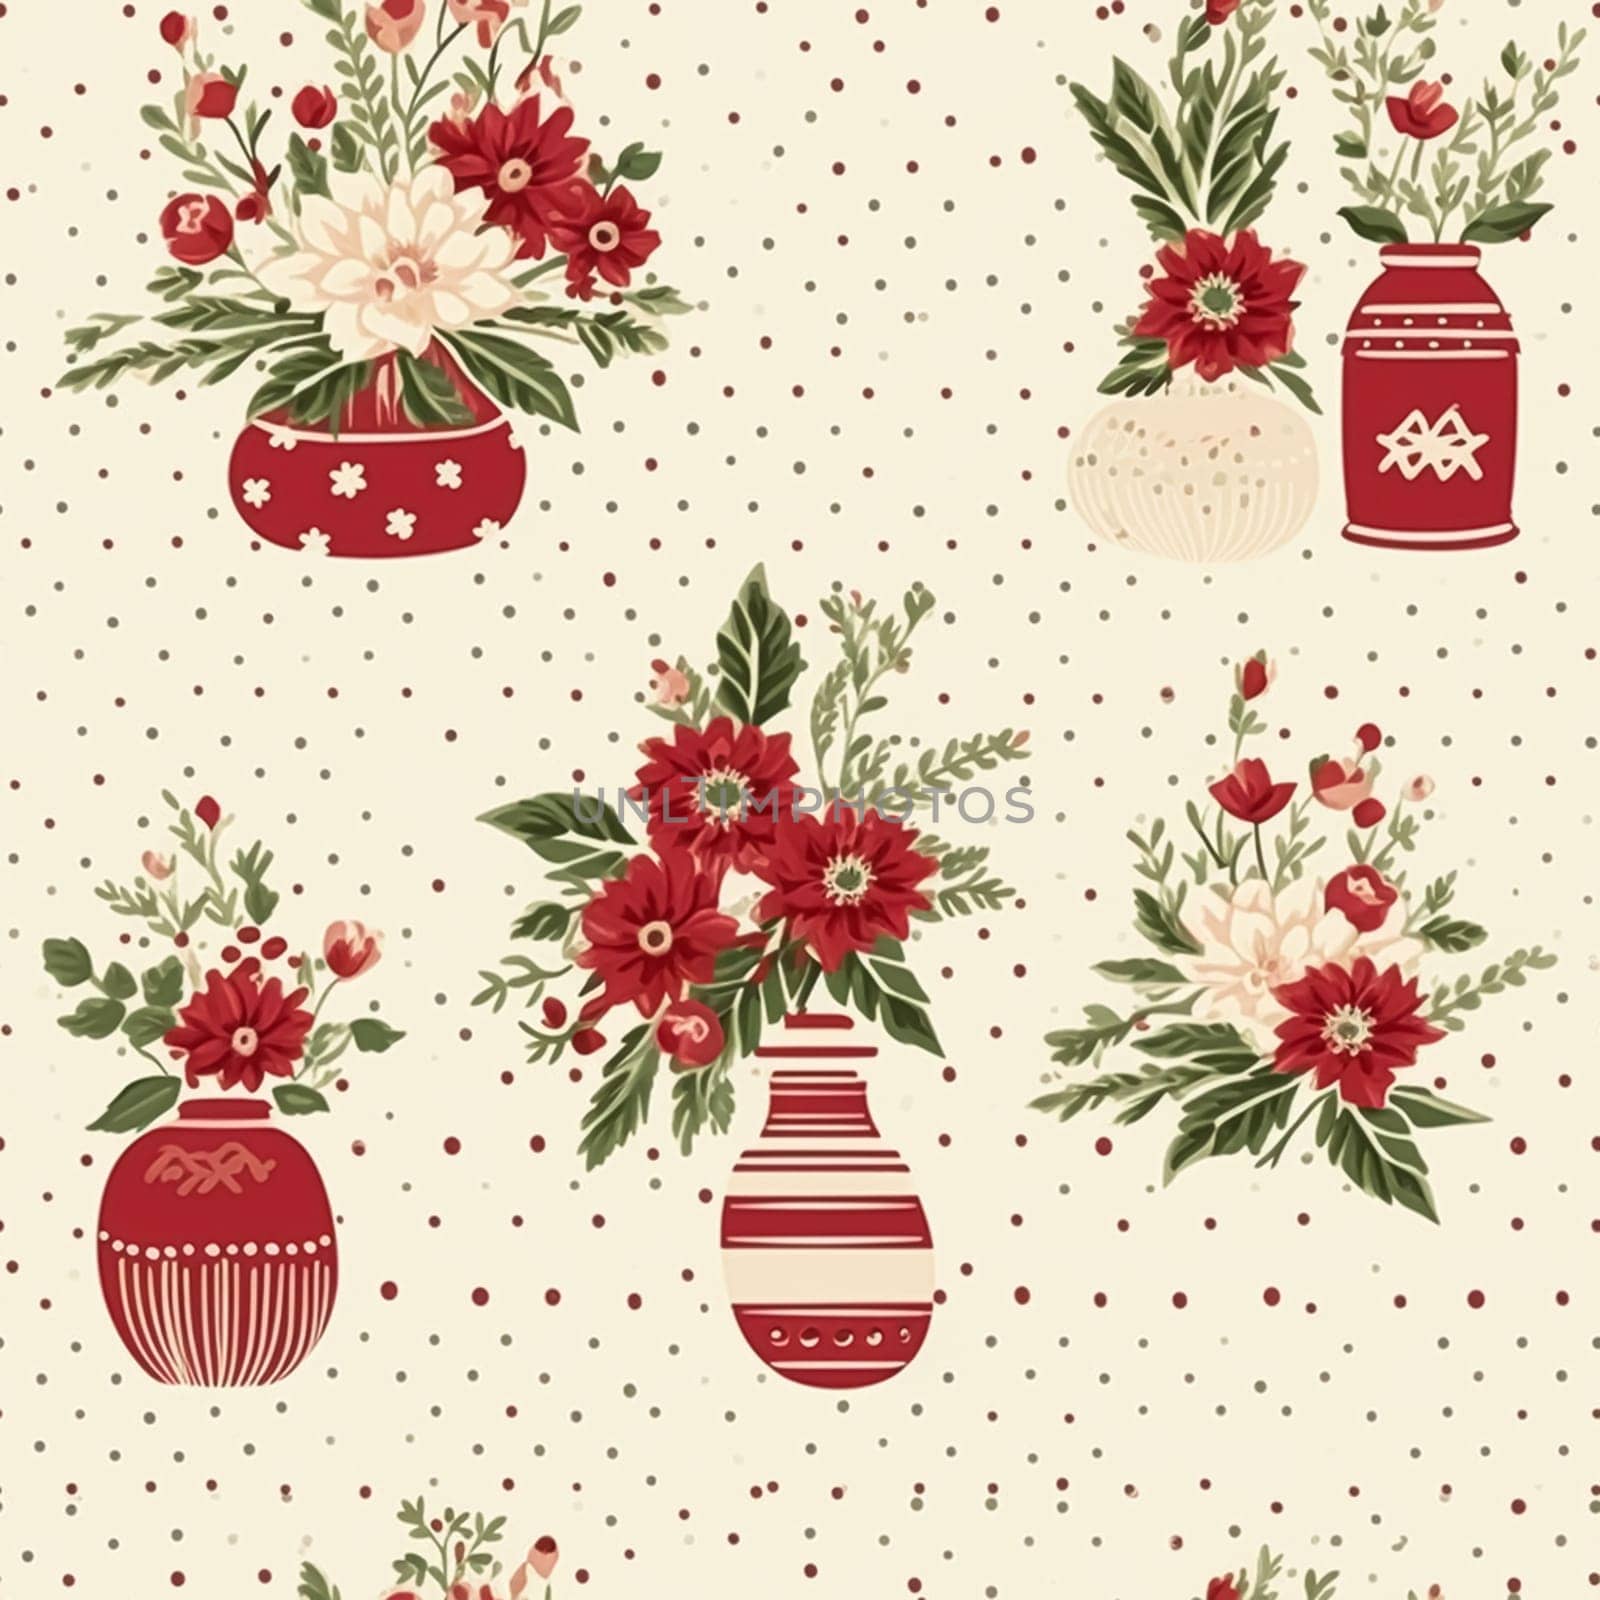 Seamless pattern, tileable holiday flowers in vase, country dots print for wallpaper, wrapping paper, scrapbook, fabric and product design by Anneleven